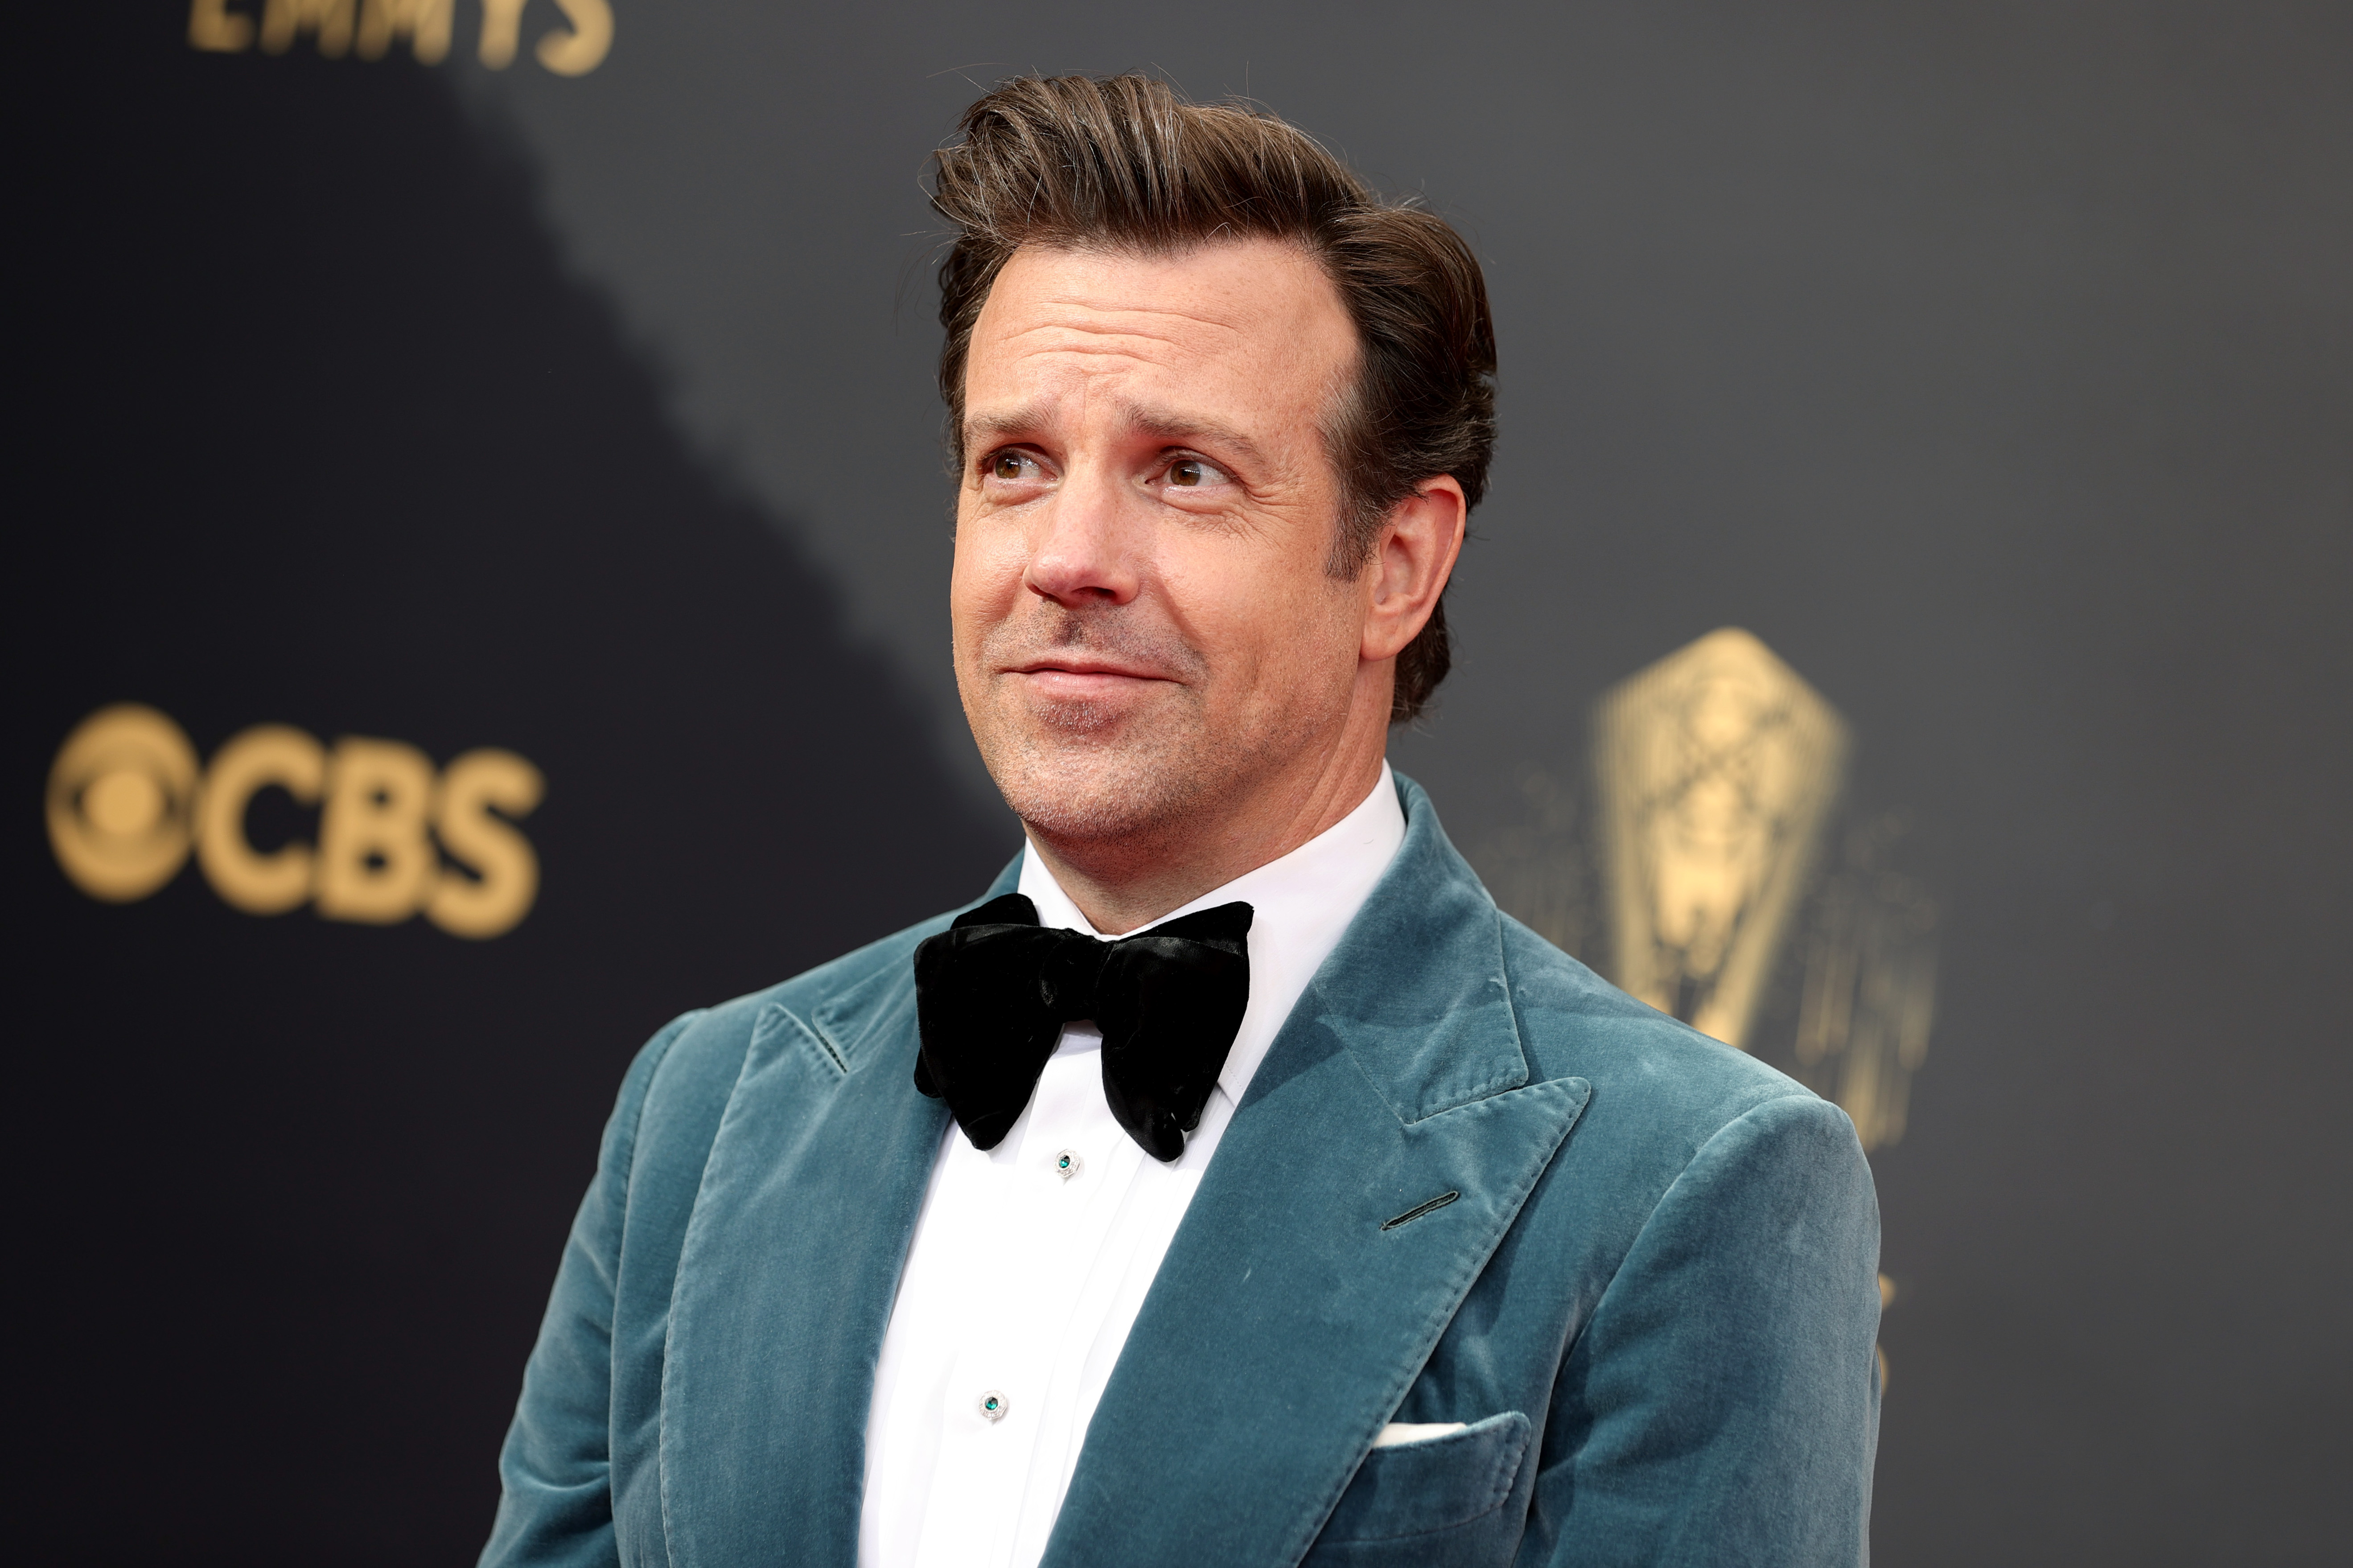 Jason Sudeikis poses on the red carpet at the 73rd Primetime Emmy Awards